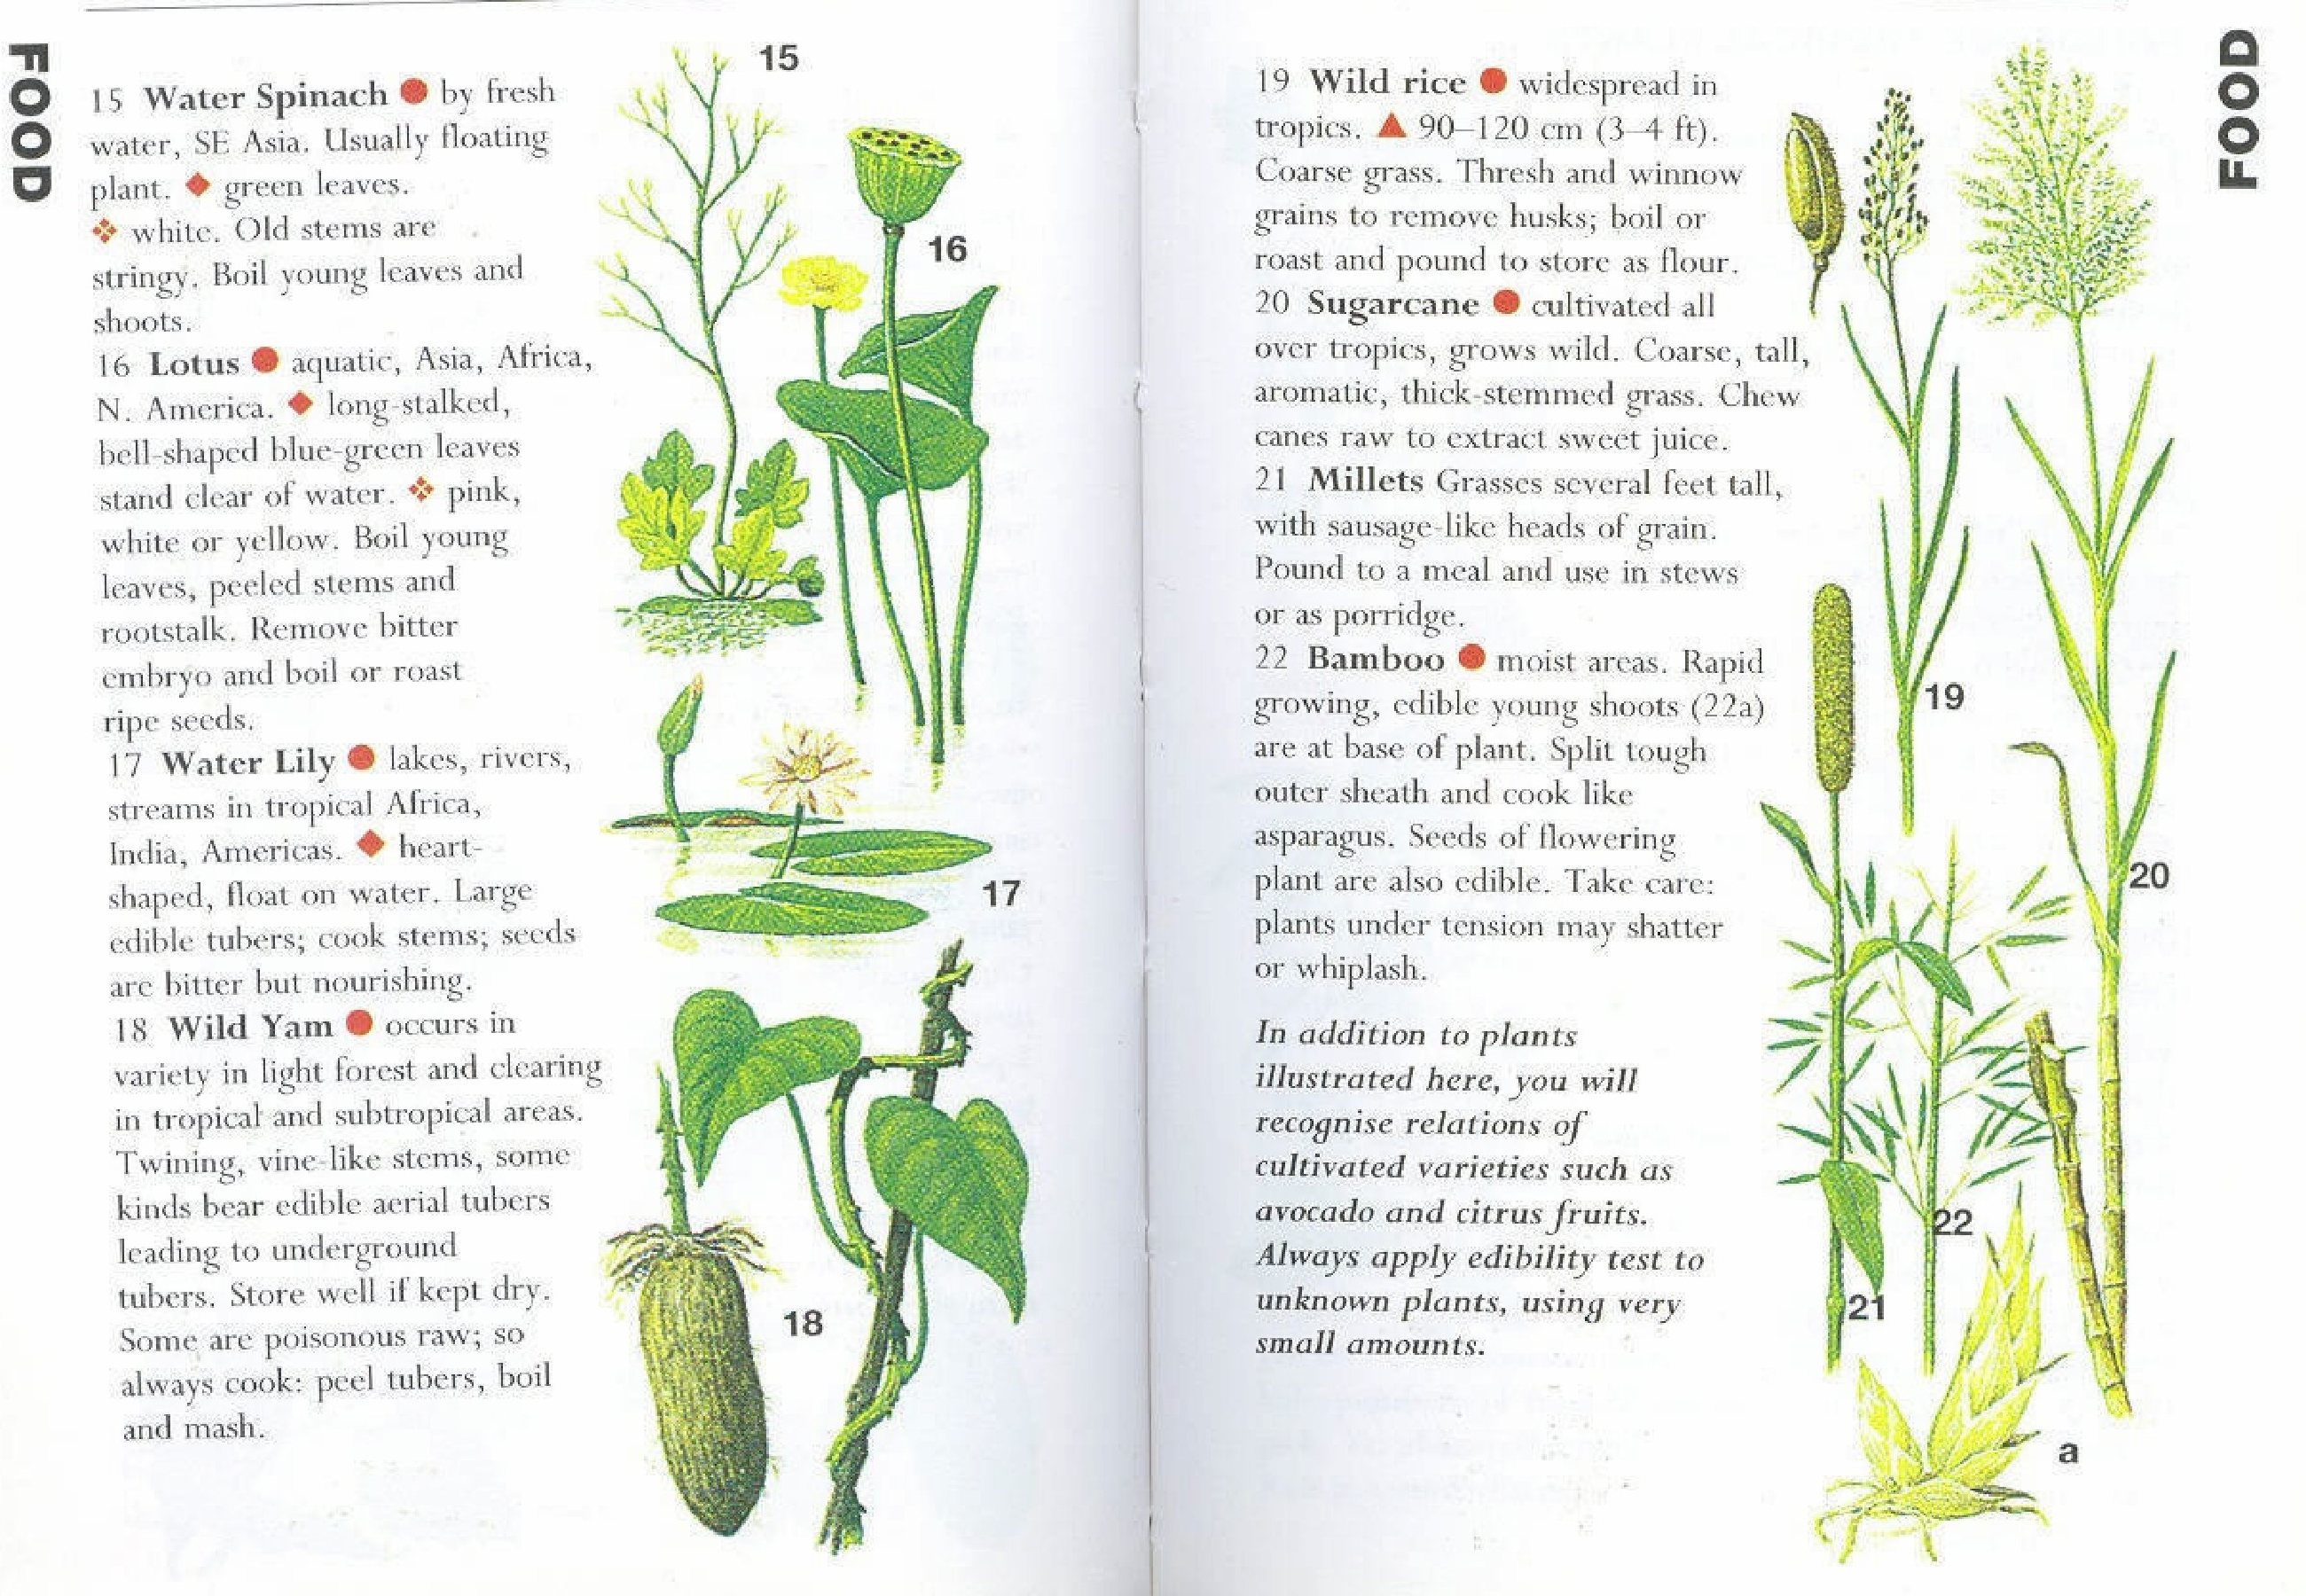 Some of the most useful edible plants are Water spinach, Lotus, Water Lily, Wild Yam, Wild rice, Sugarcane, Millets, Bamboo. One can recognise the relations of cultivated varieties such as […]